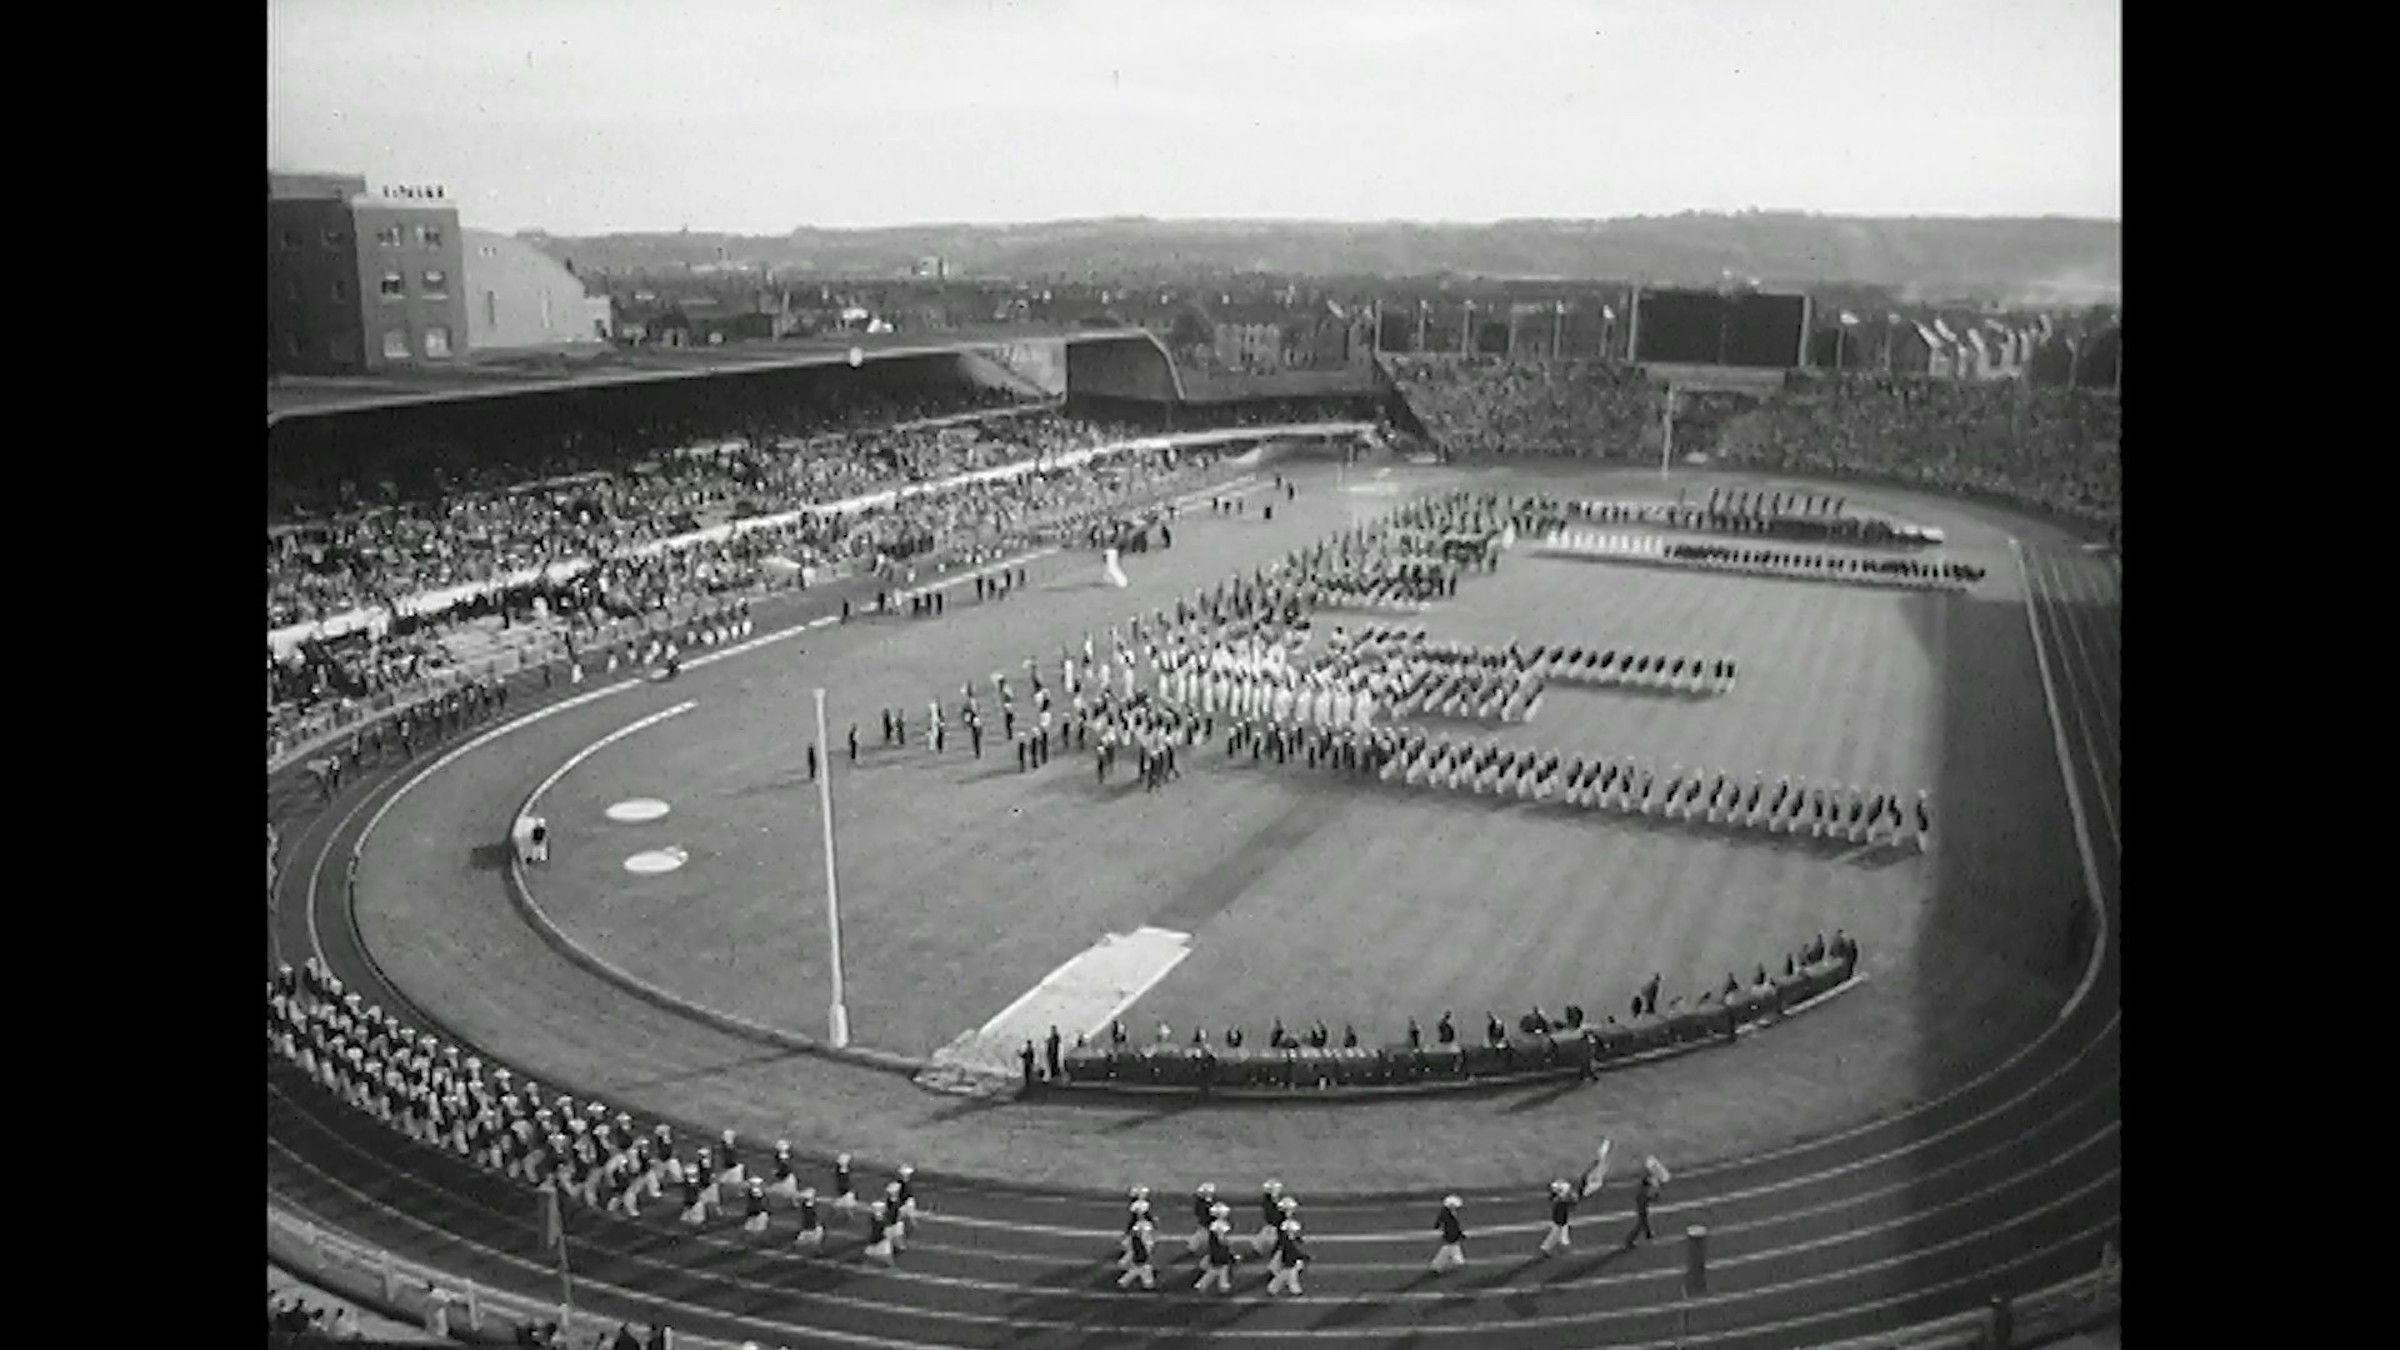 a b&w areial view of a running track